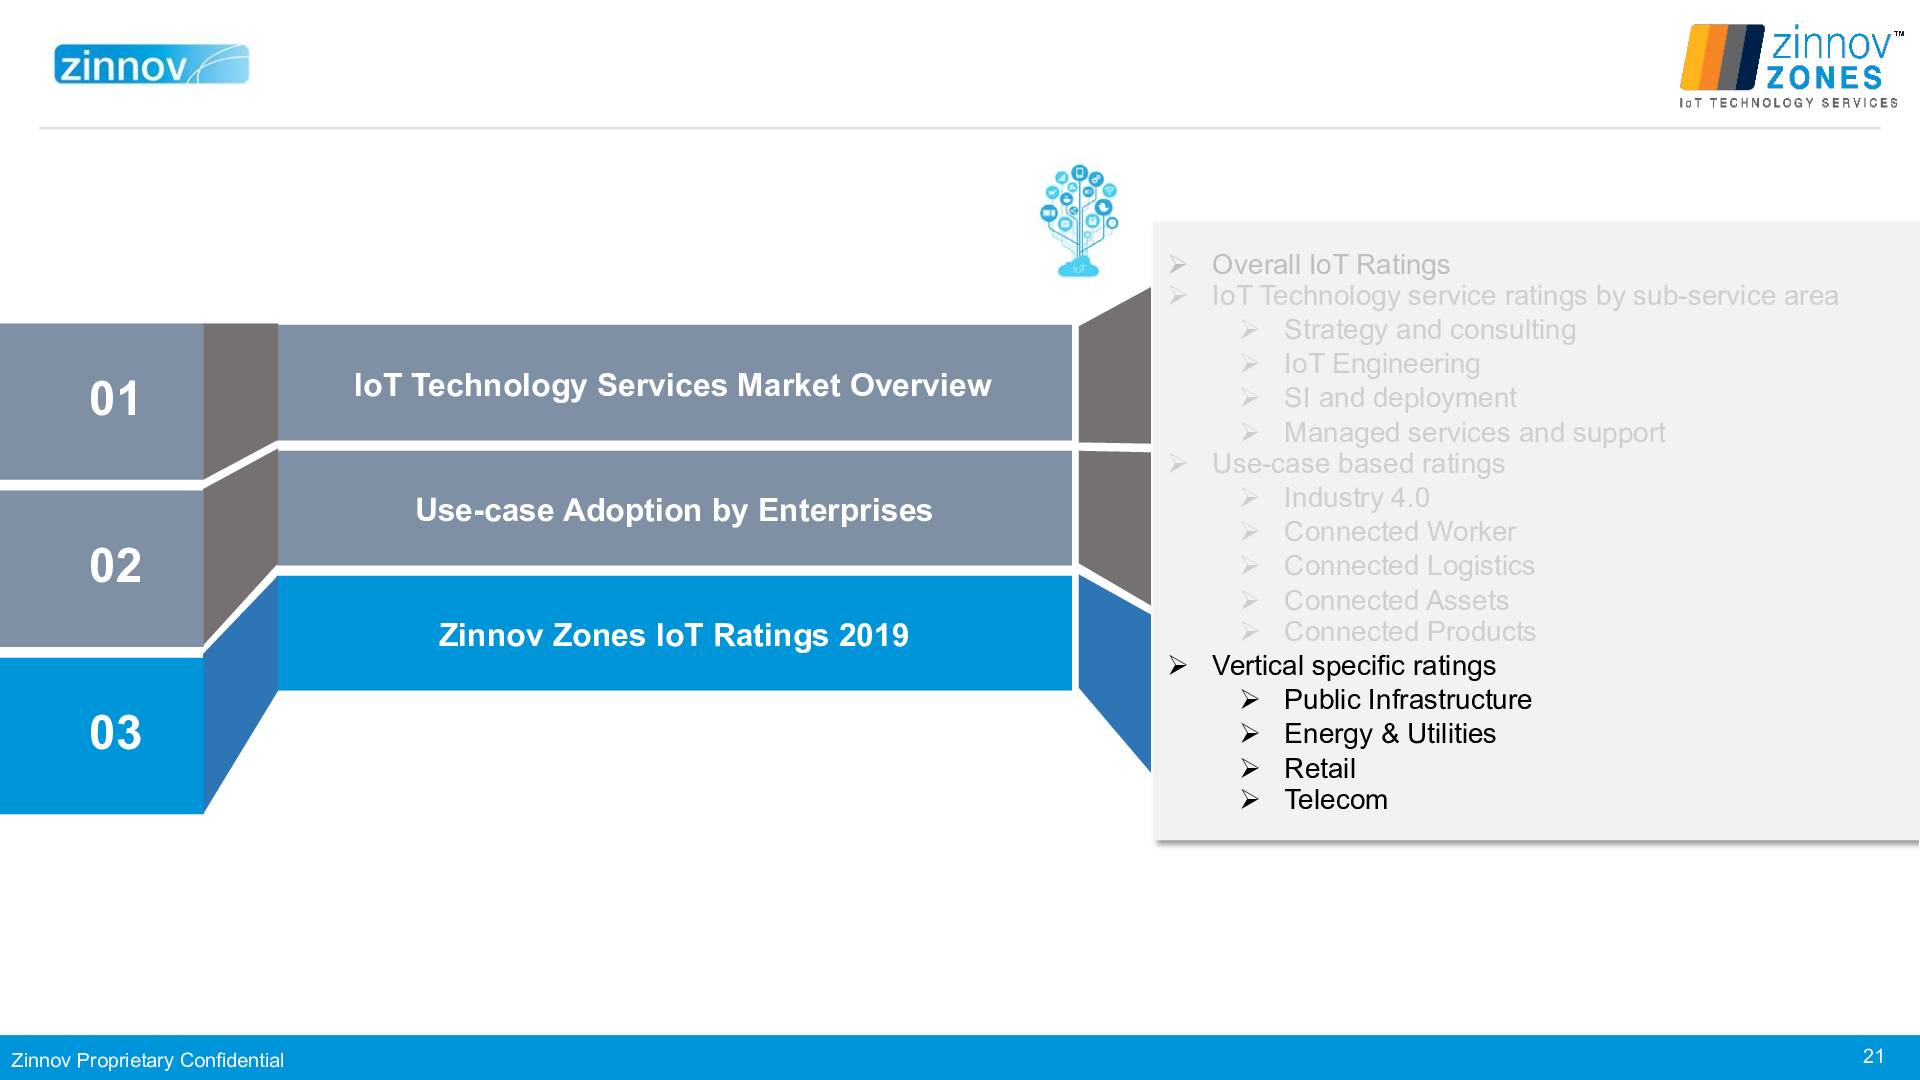 Zinnov Zones Iot Technology Services 2019 Ratings21